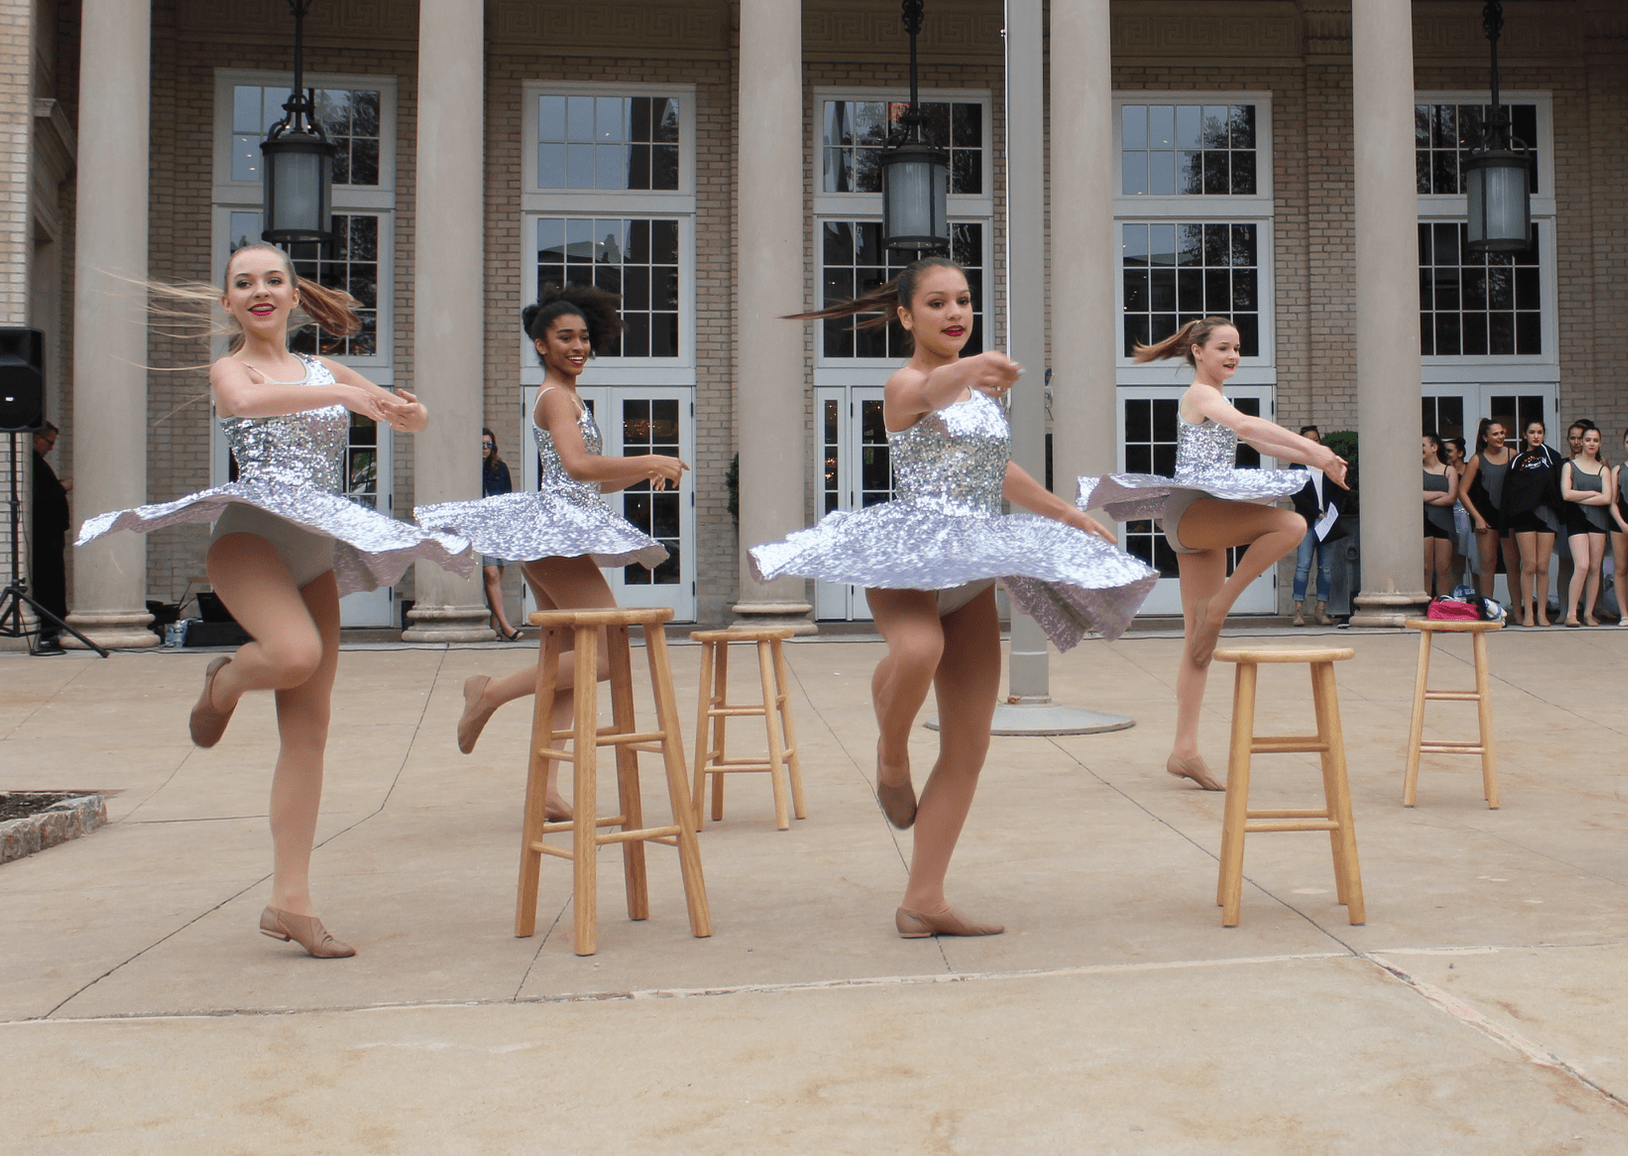 Allegra dancers performed outside RH. May 4, 2017 Photo: Leslie Yager